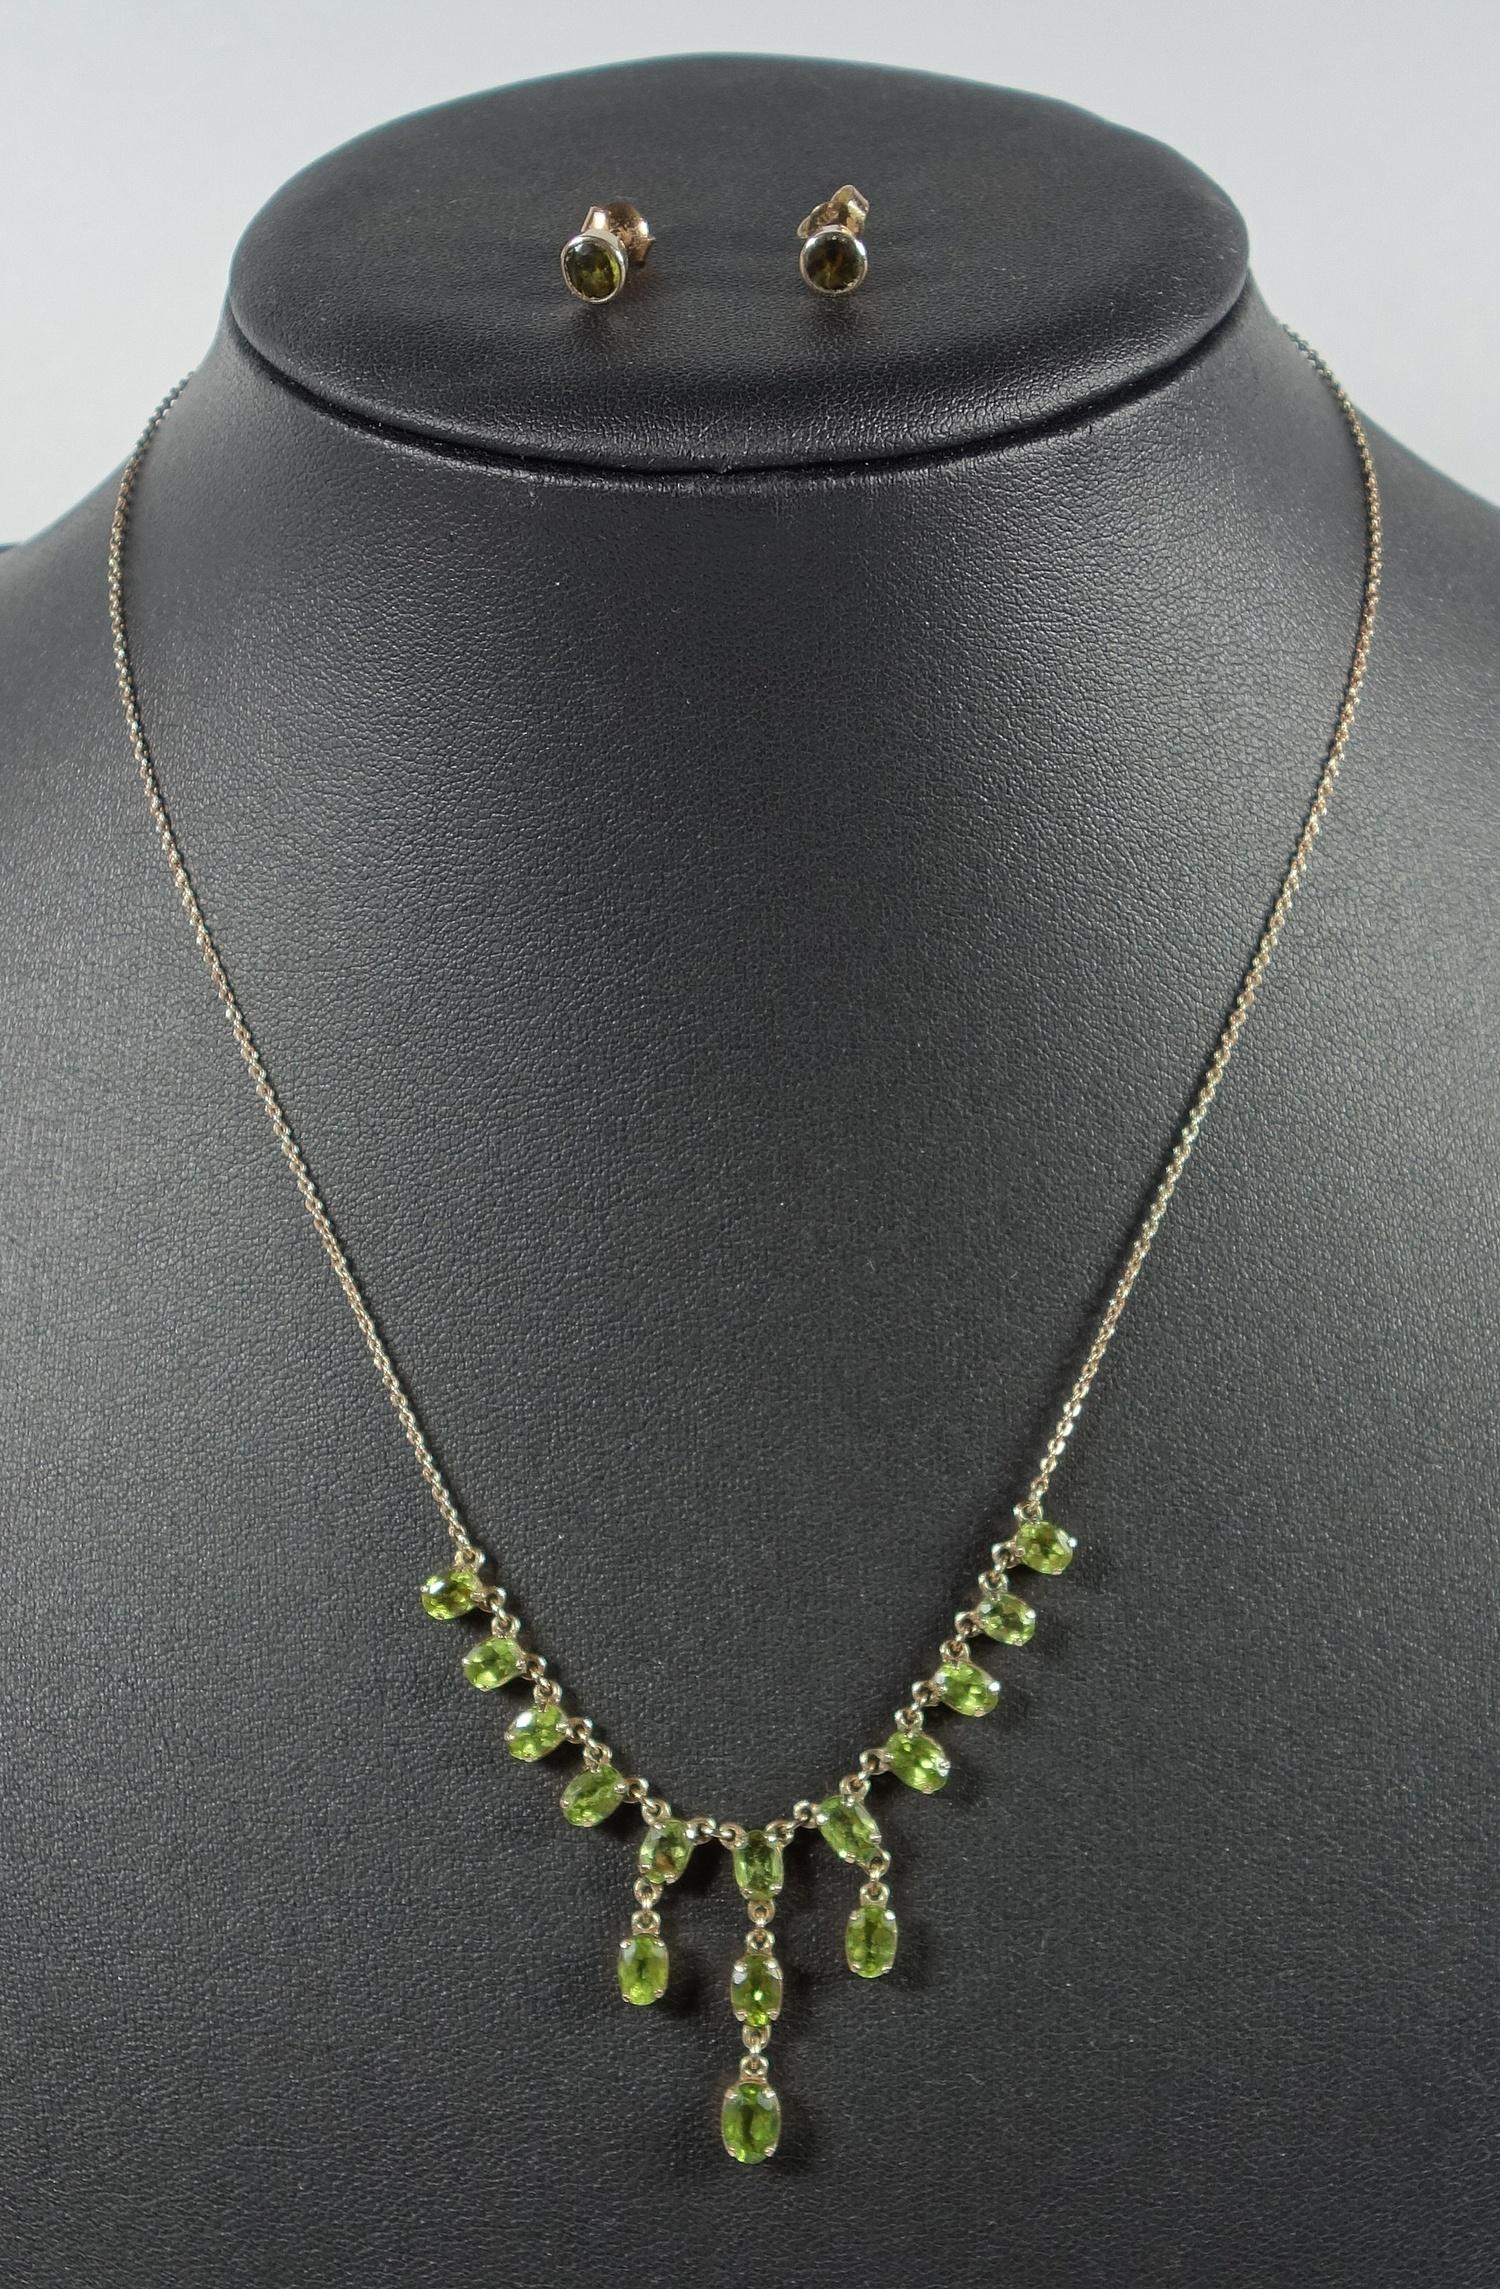 A PERIDOT FRINGE NECKLACE, SET WITH FIFTEEN OVAL CUT PERIDOT ON AN INTEGRATED 9 CT YELLOW GOLD